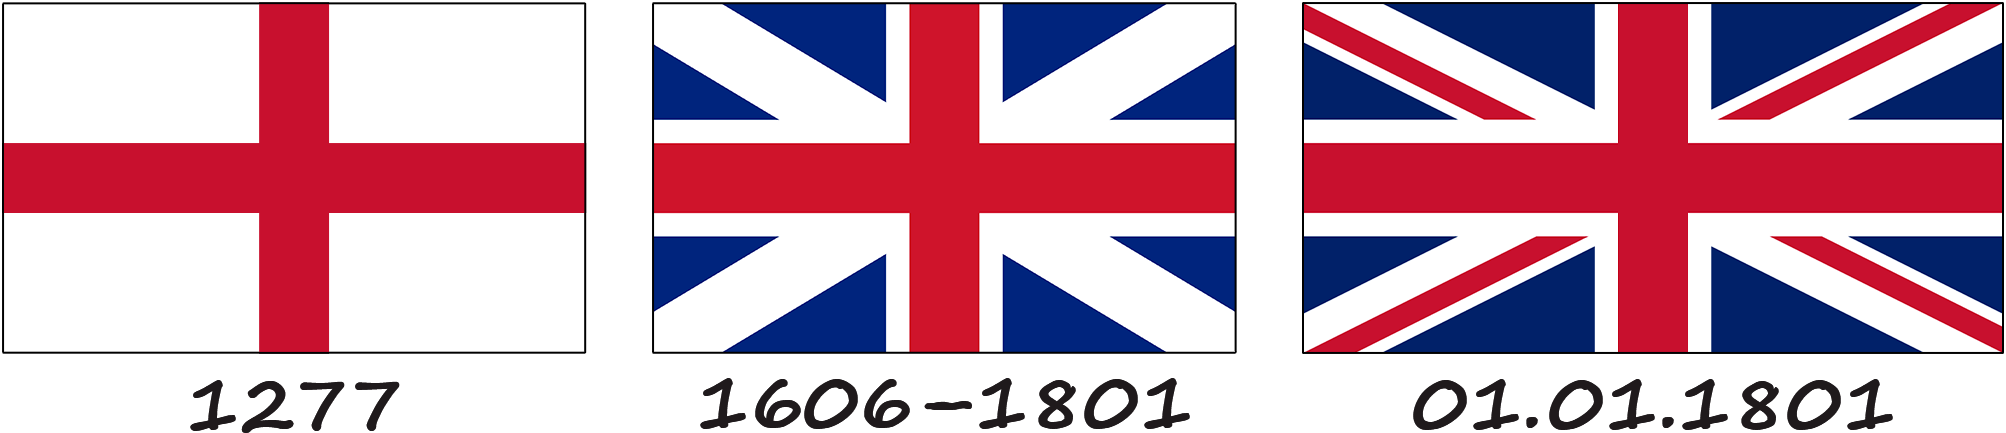 History of the flag of the United Kingdom